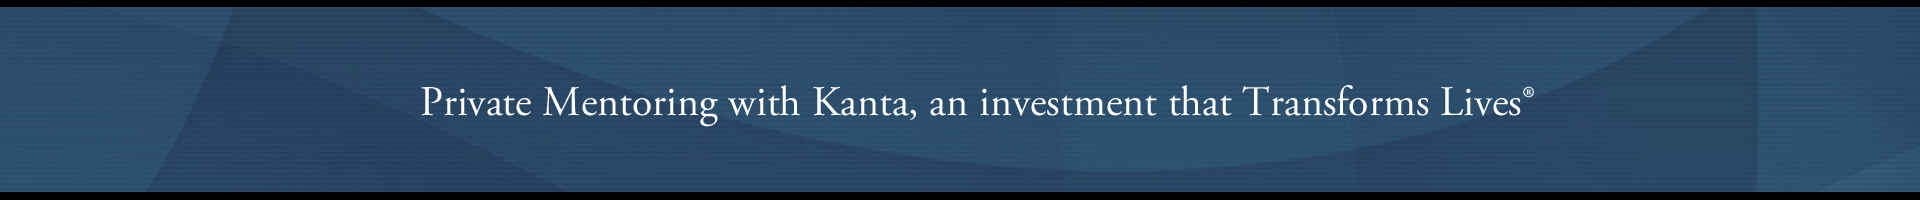 Private Mentoring with Kanta, an investment that Transforms Lives.   Co